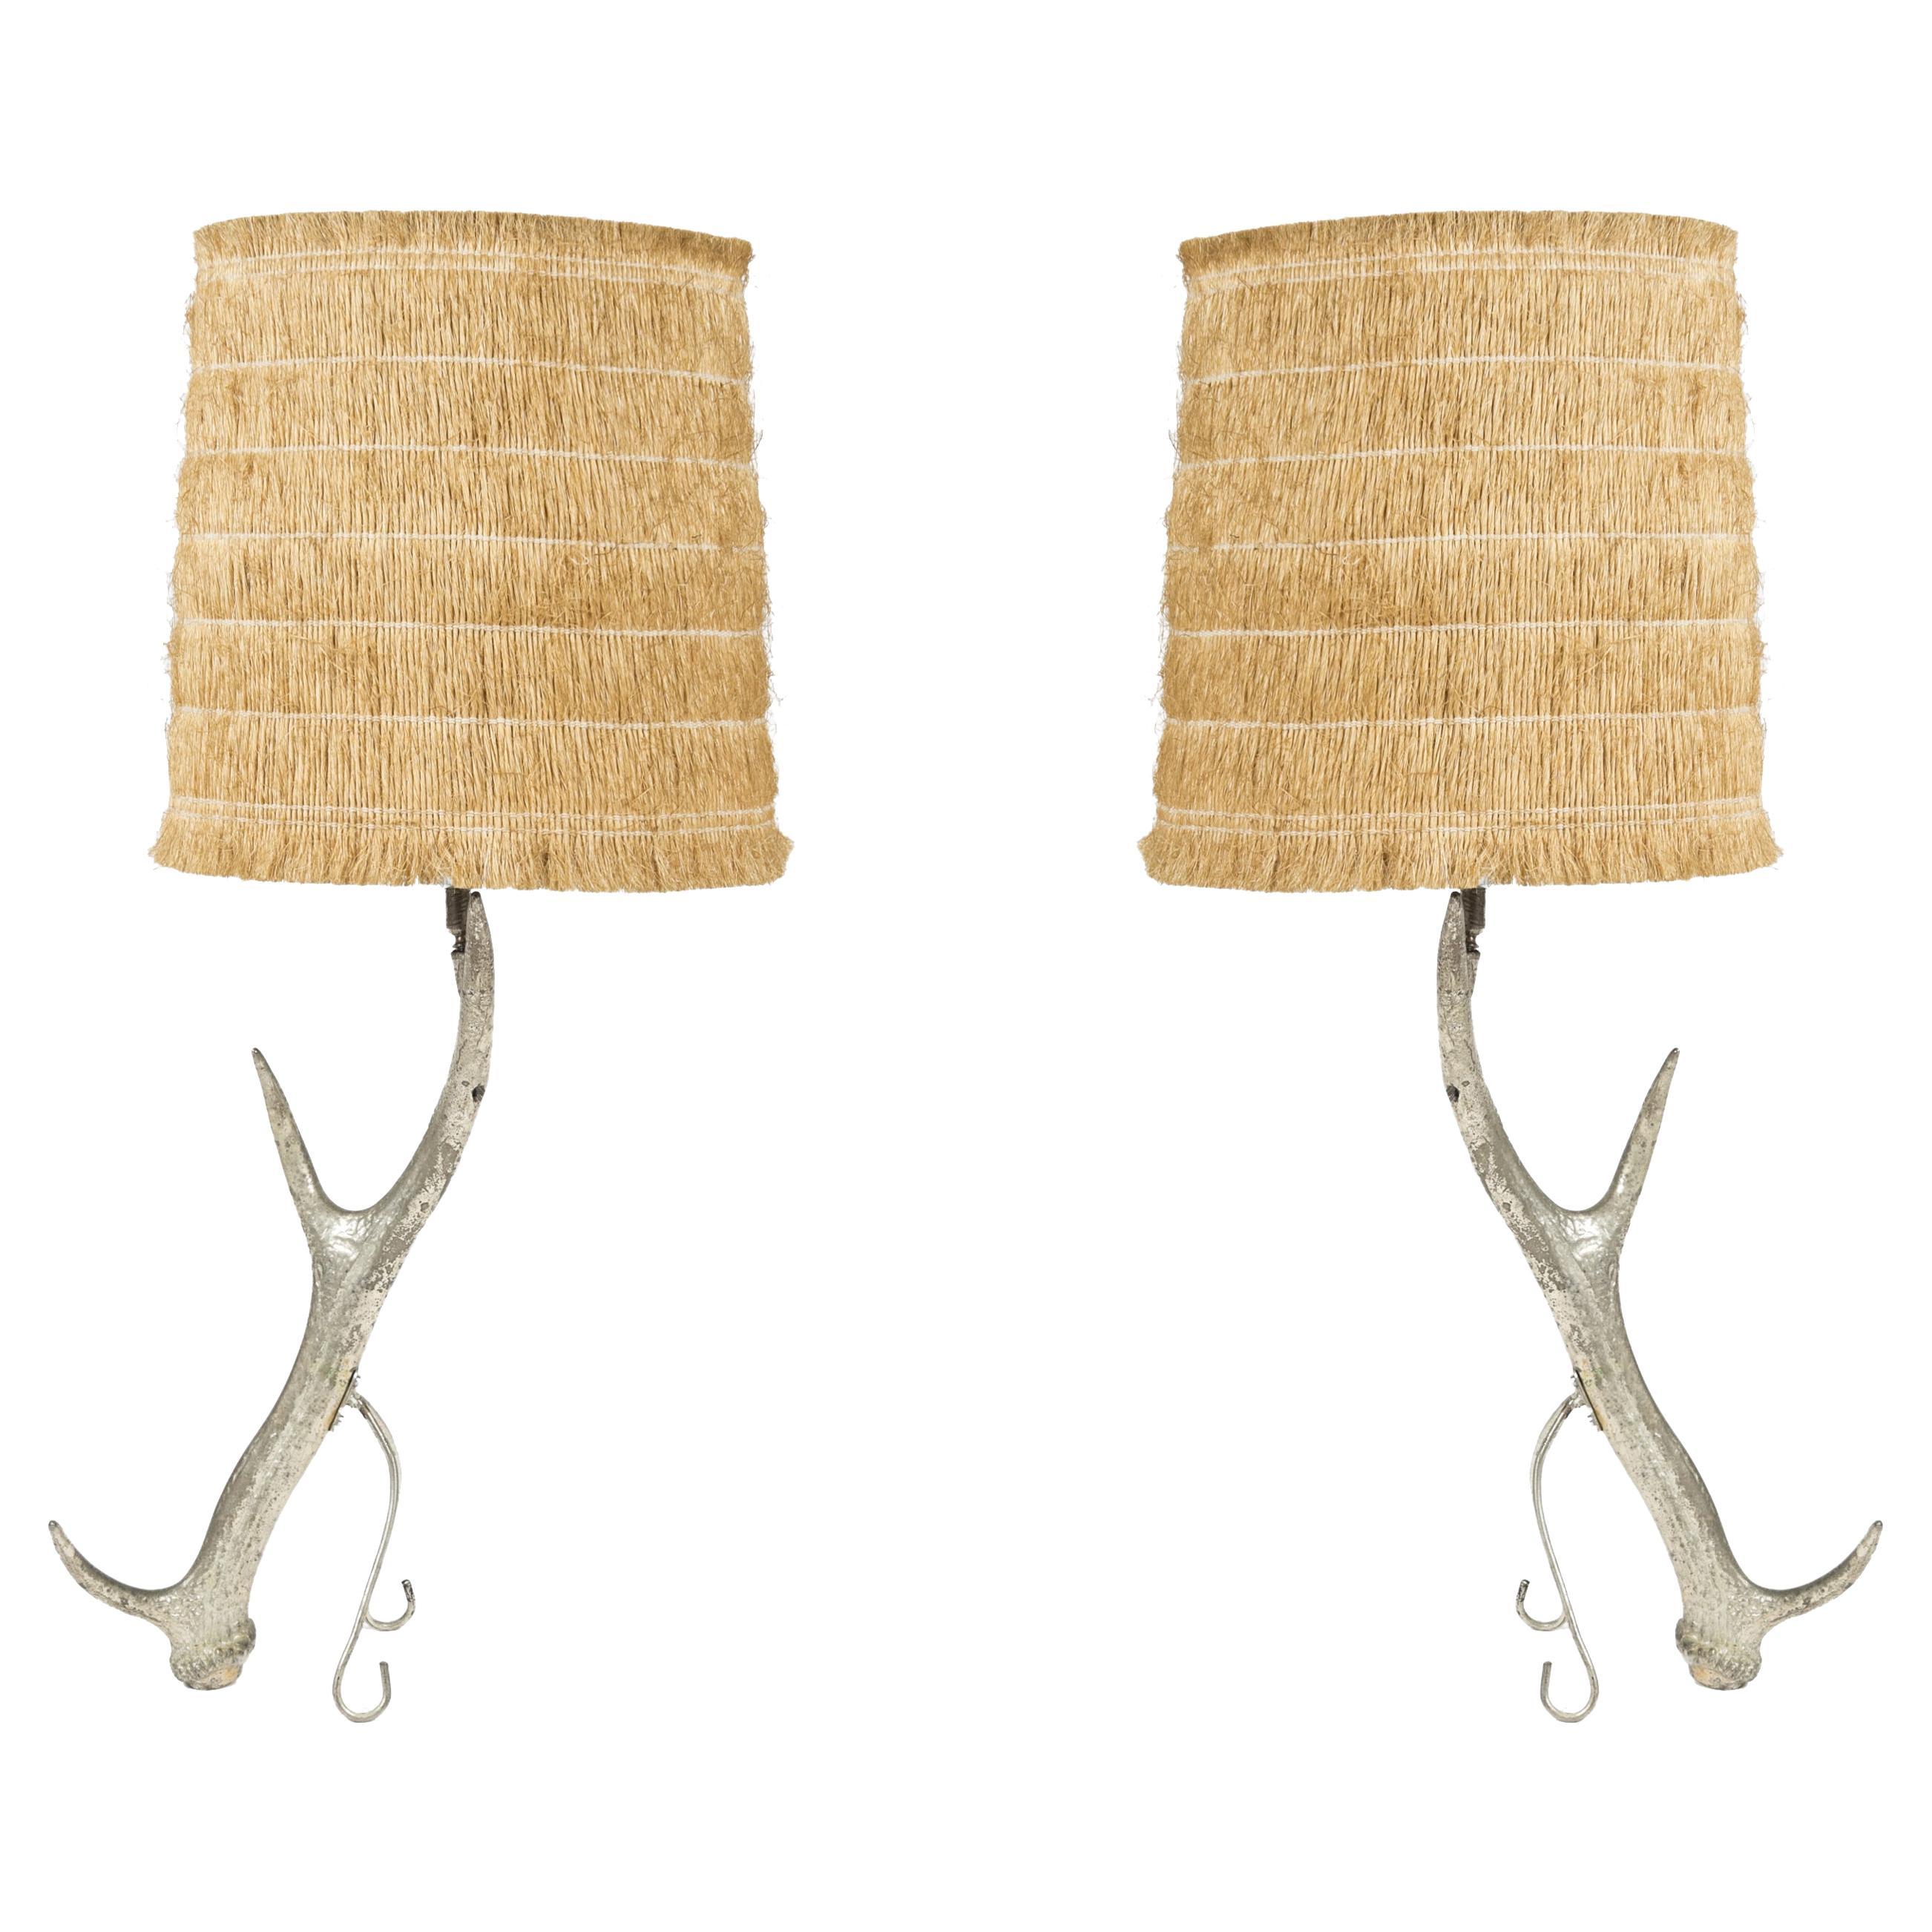 Pair of Iconic Bronze Lamps by Maria Pergay